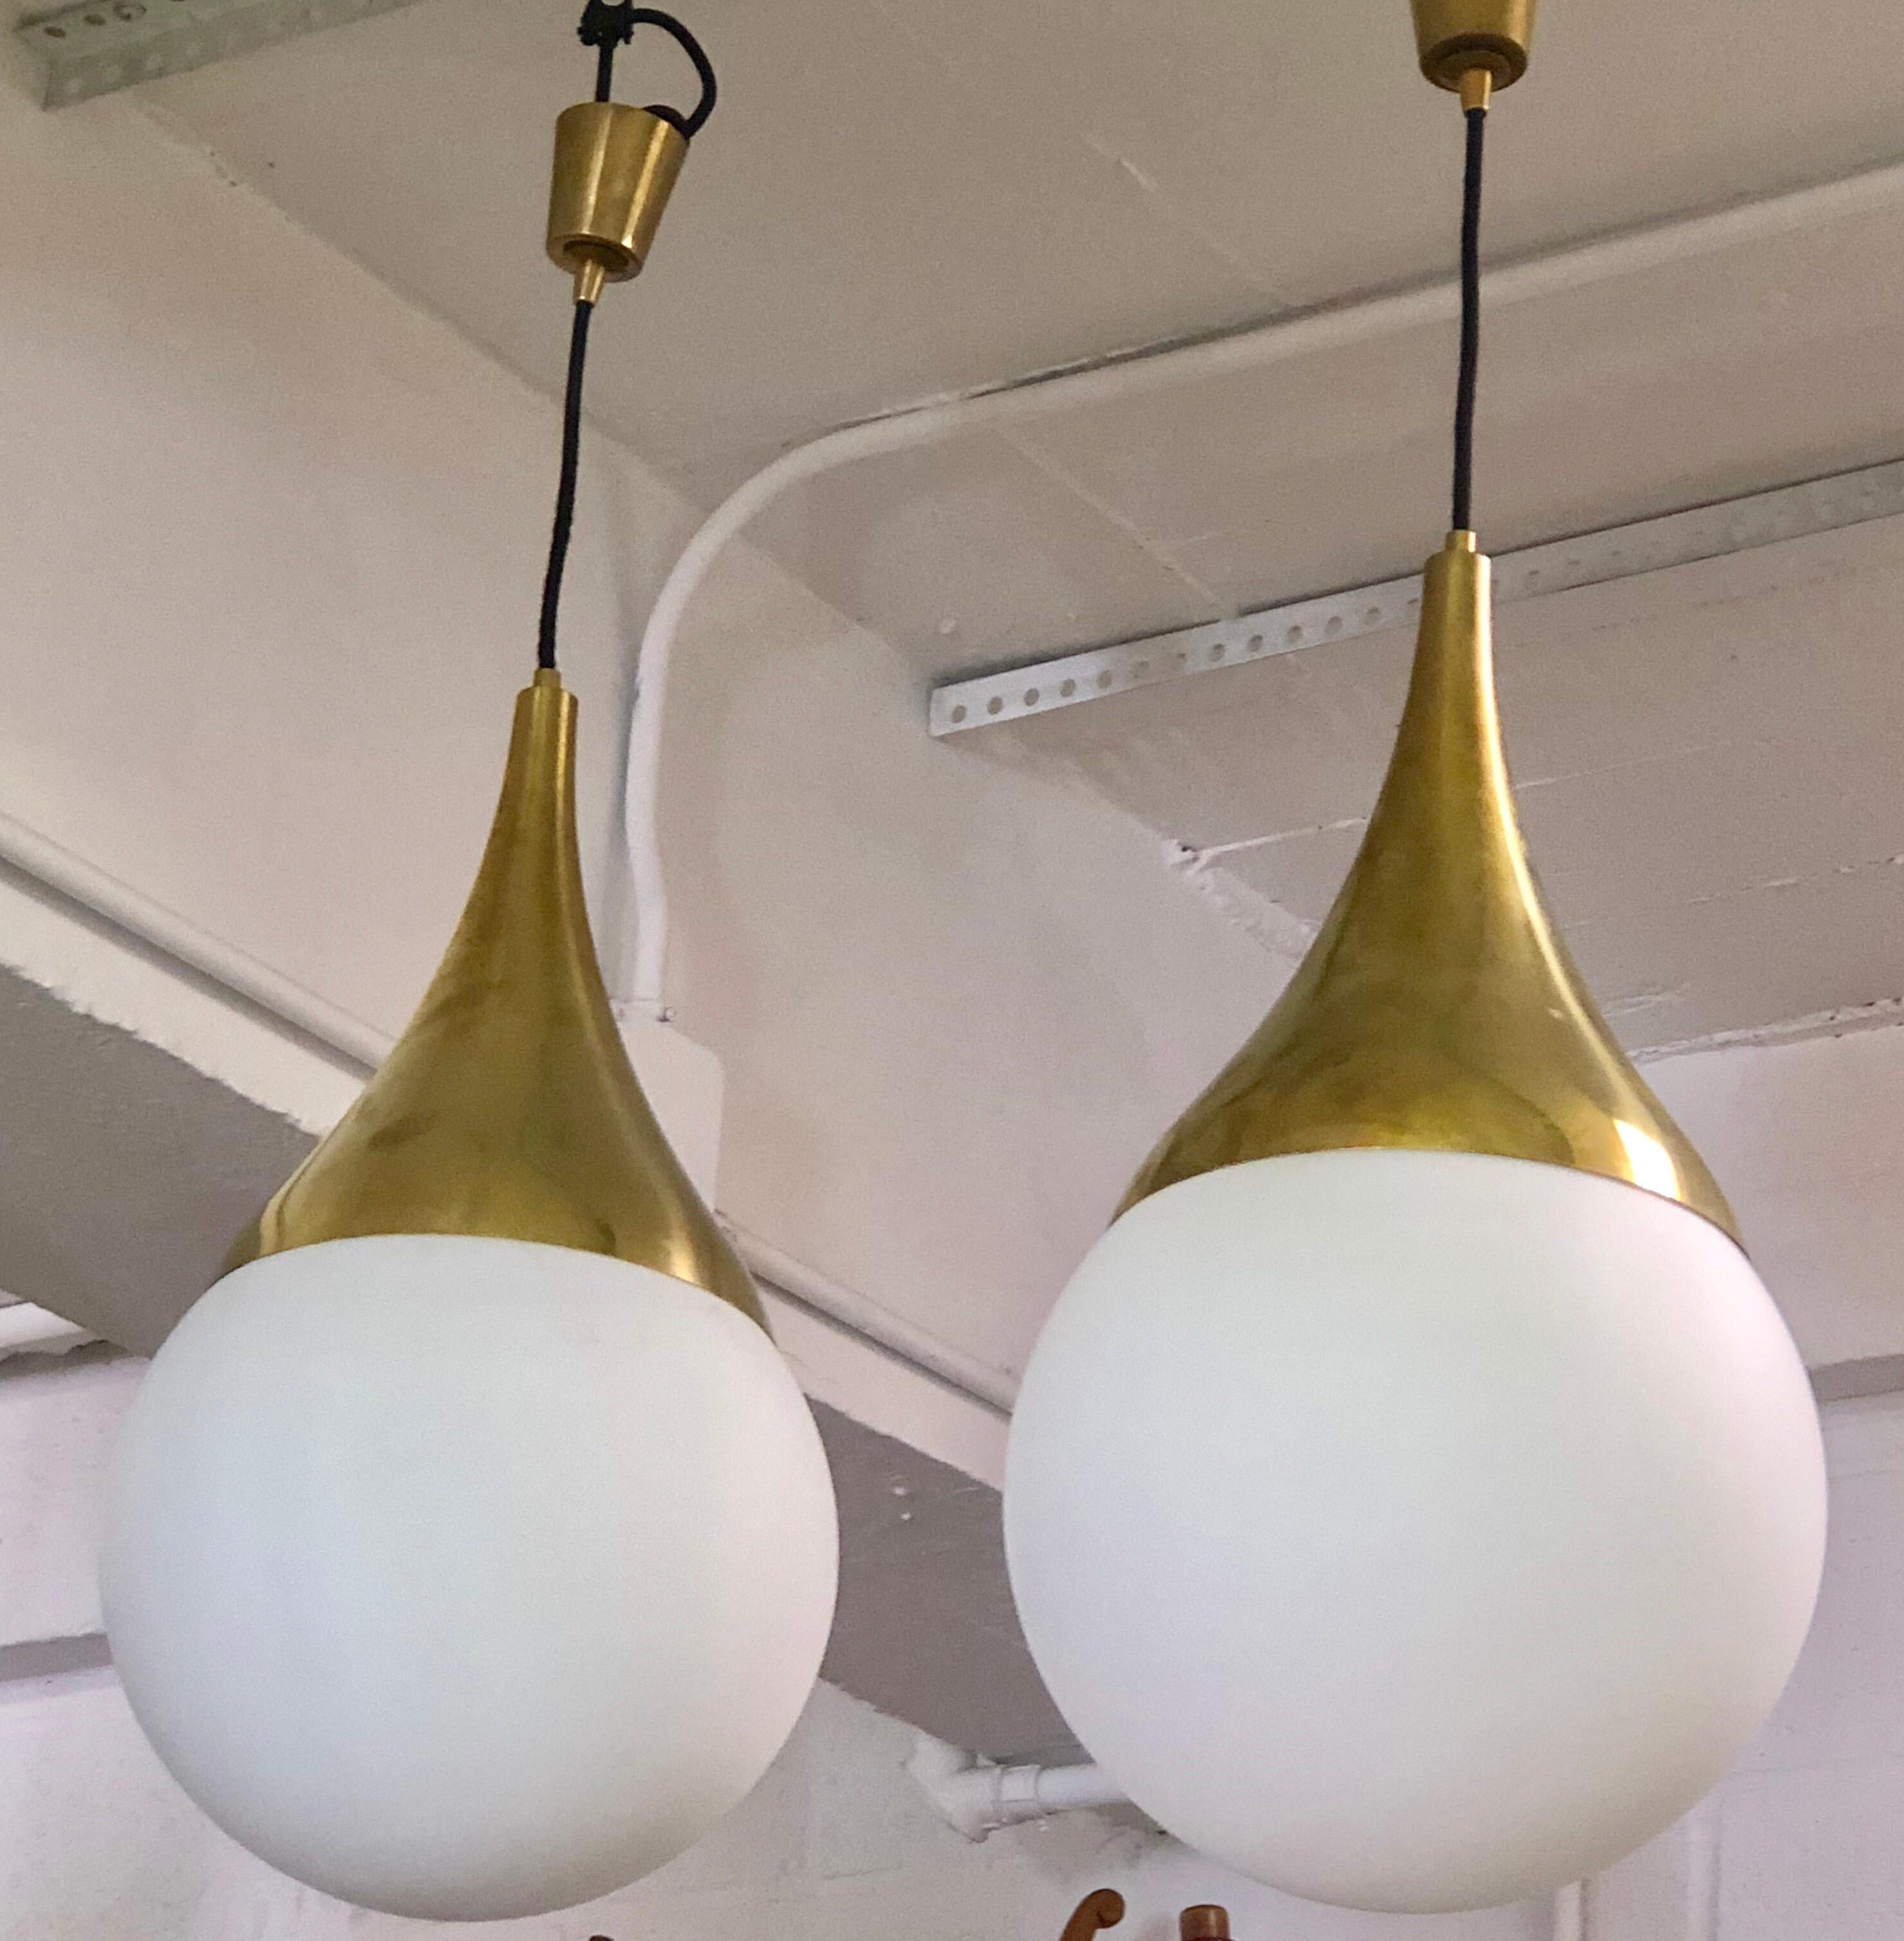 2 Rare Italian Mid-Century Modern solid brass and mold blown white opaline glass pendants, chandeliers or lanterns by Max Ingrand for Fontana Arte. The pieces are masterpieces of design with a timeless, elegantly conceived forms and executed with